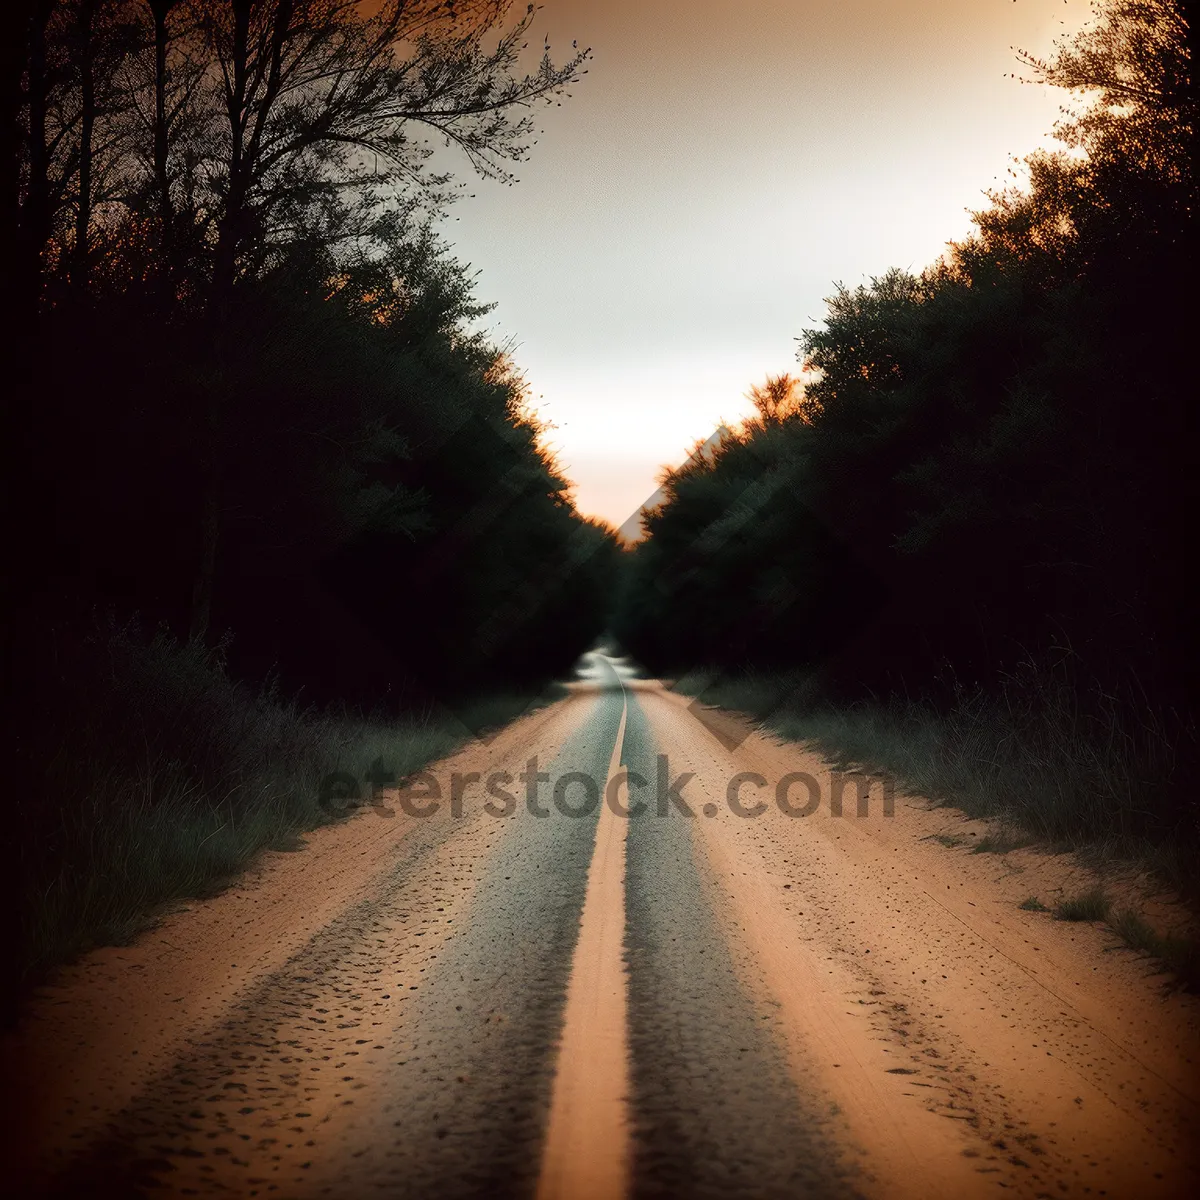 Picture of Sunset Drive on Open Road: Fast, Blurred Landscape